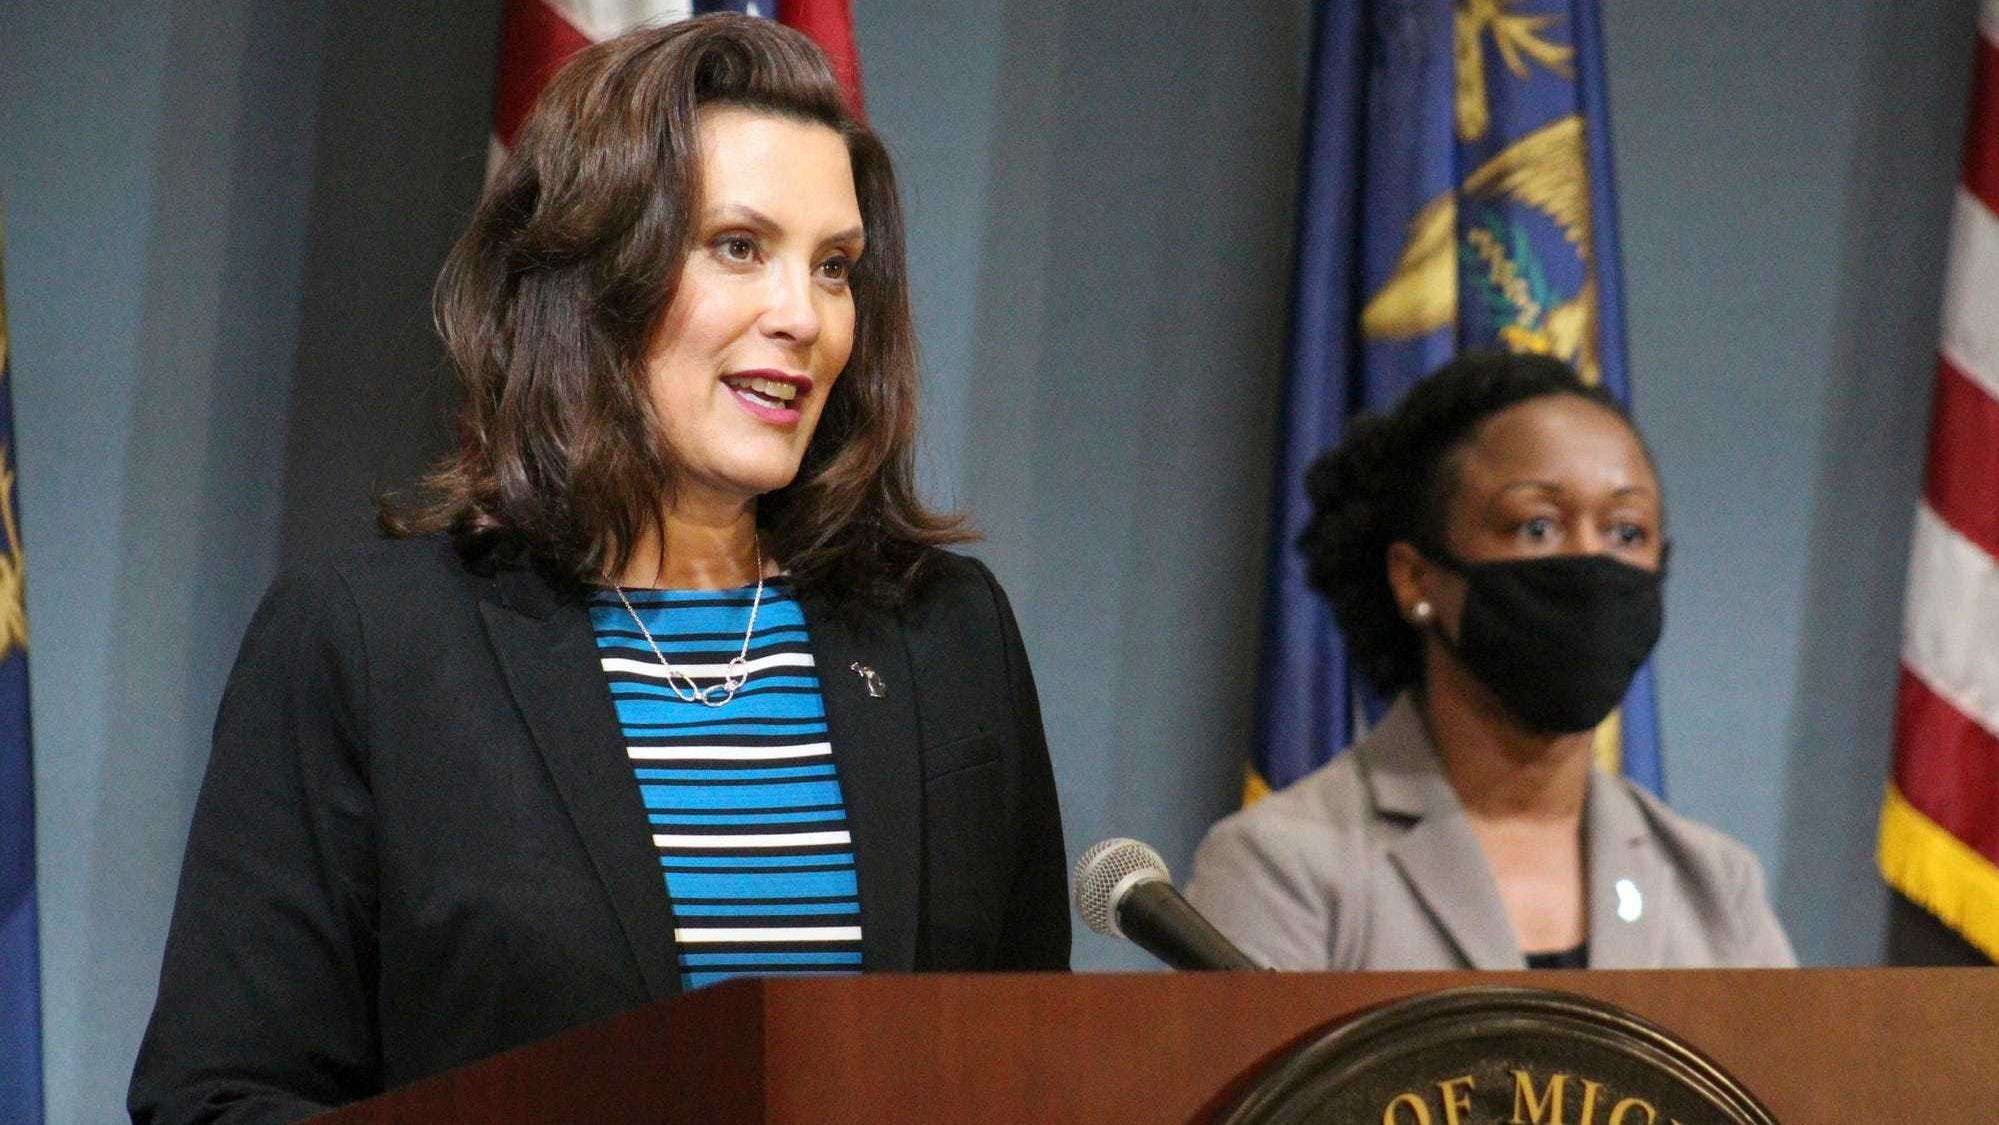 image for Plans to kidnap Whitmer, overthrow government spoiled, officials say